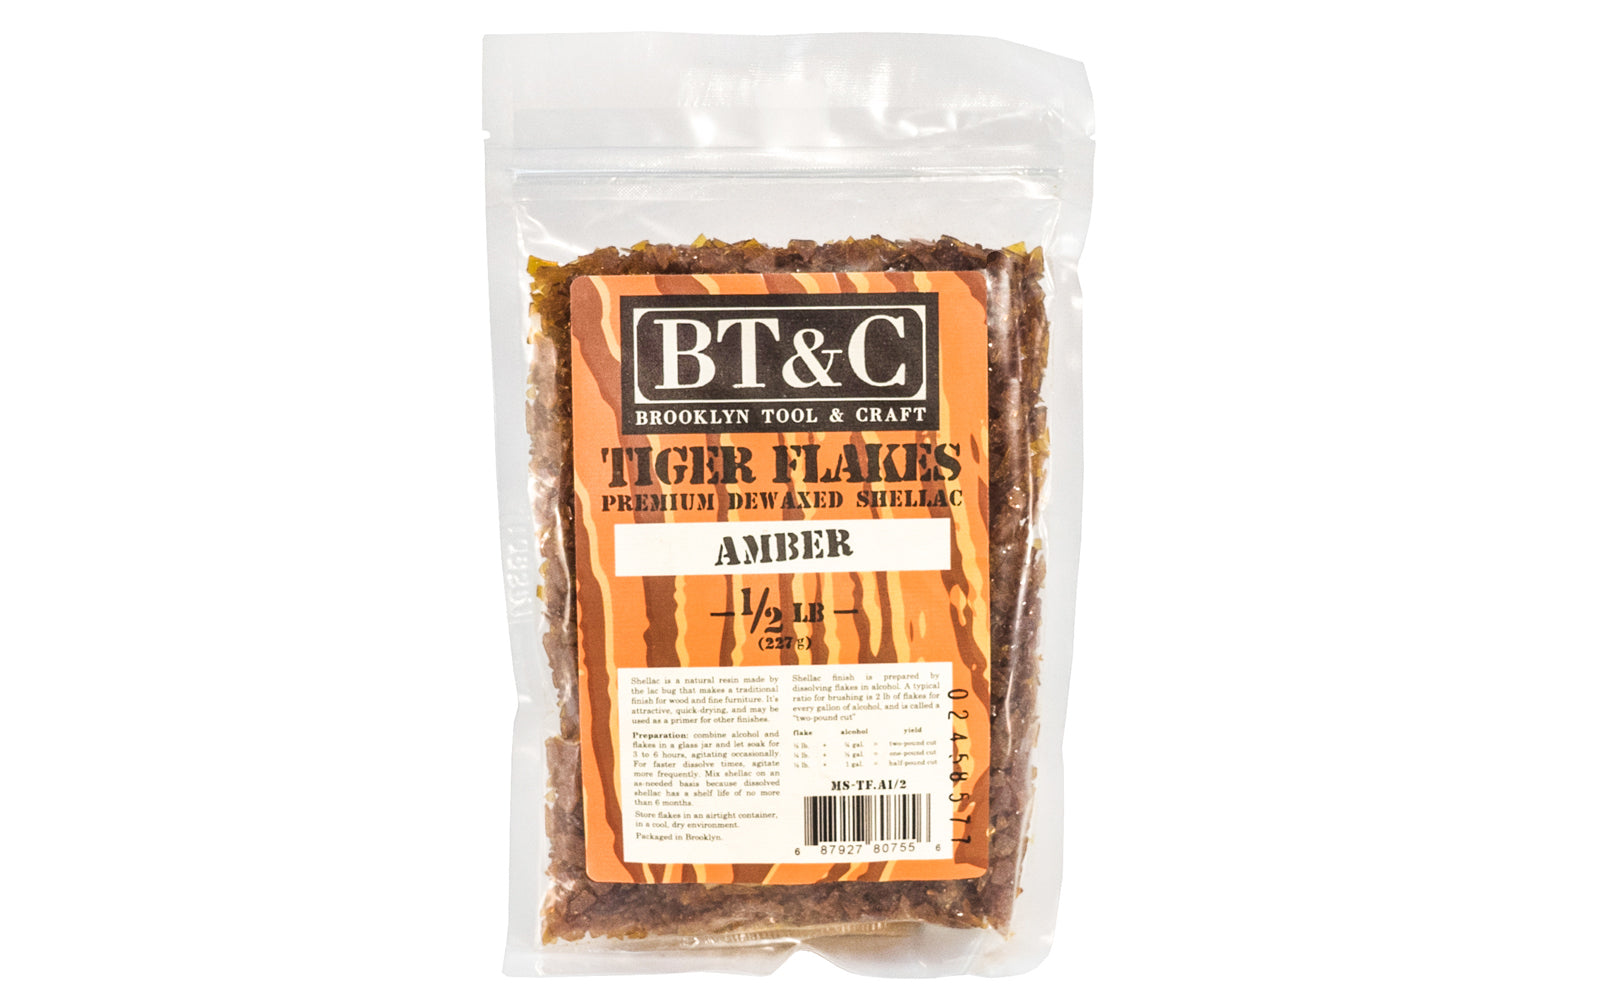 Dewaxed Amber Shellac Tiger Flakes - 1/2 lb Bag - Refined in Germany ~ once dissolved in alcohol, will make a beautiful finish for woods, cork, plaster, & metals. They are refined for a clear finish. Great for French Polishing - De-waxed Amber flakes